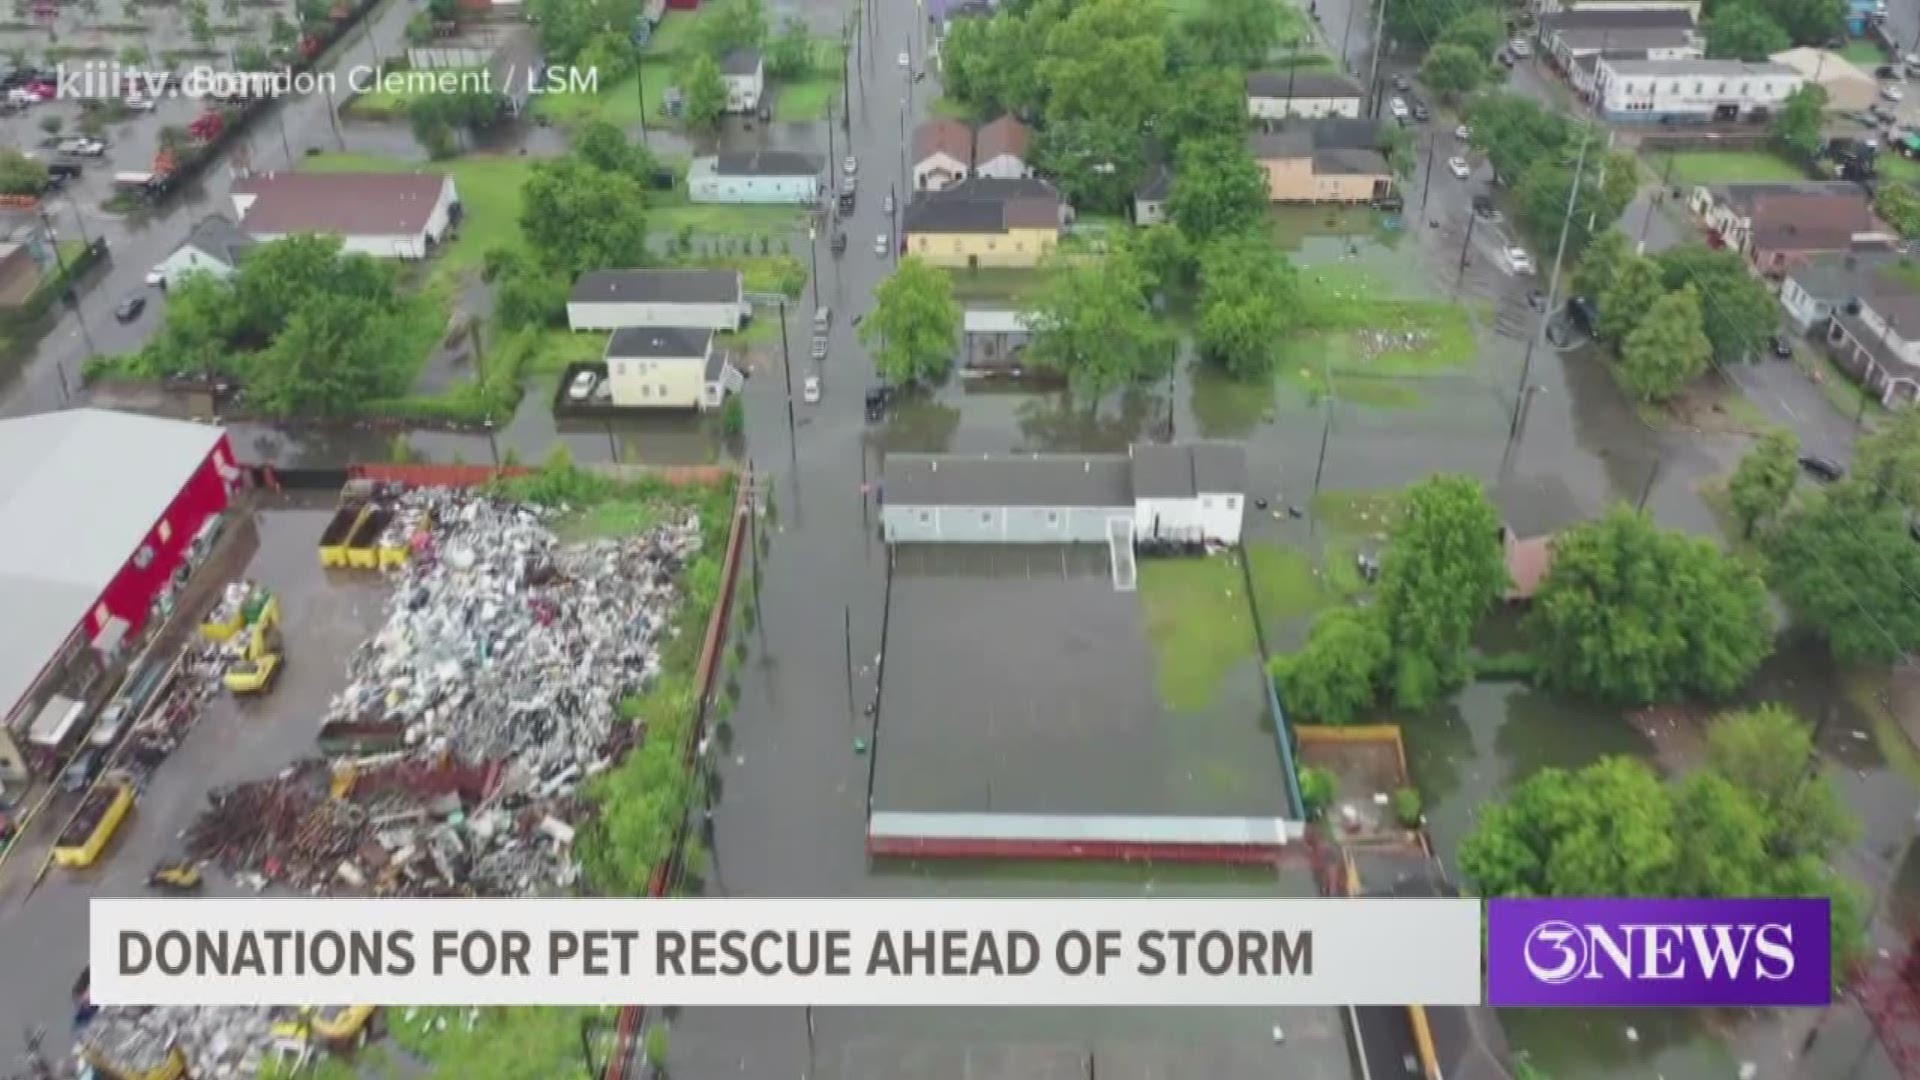 The Corpus Christi organization Furever United Rescue it's providing Aid to the Pitbulls and Paroles rescue in Lousiana expected to be severely impacted by the tropical storm Barry.